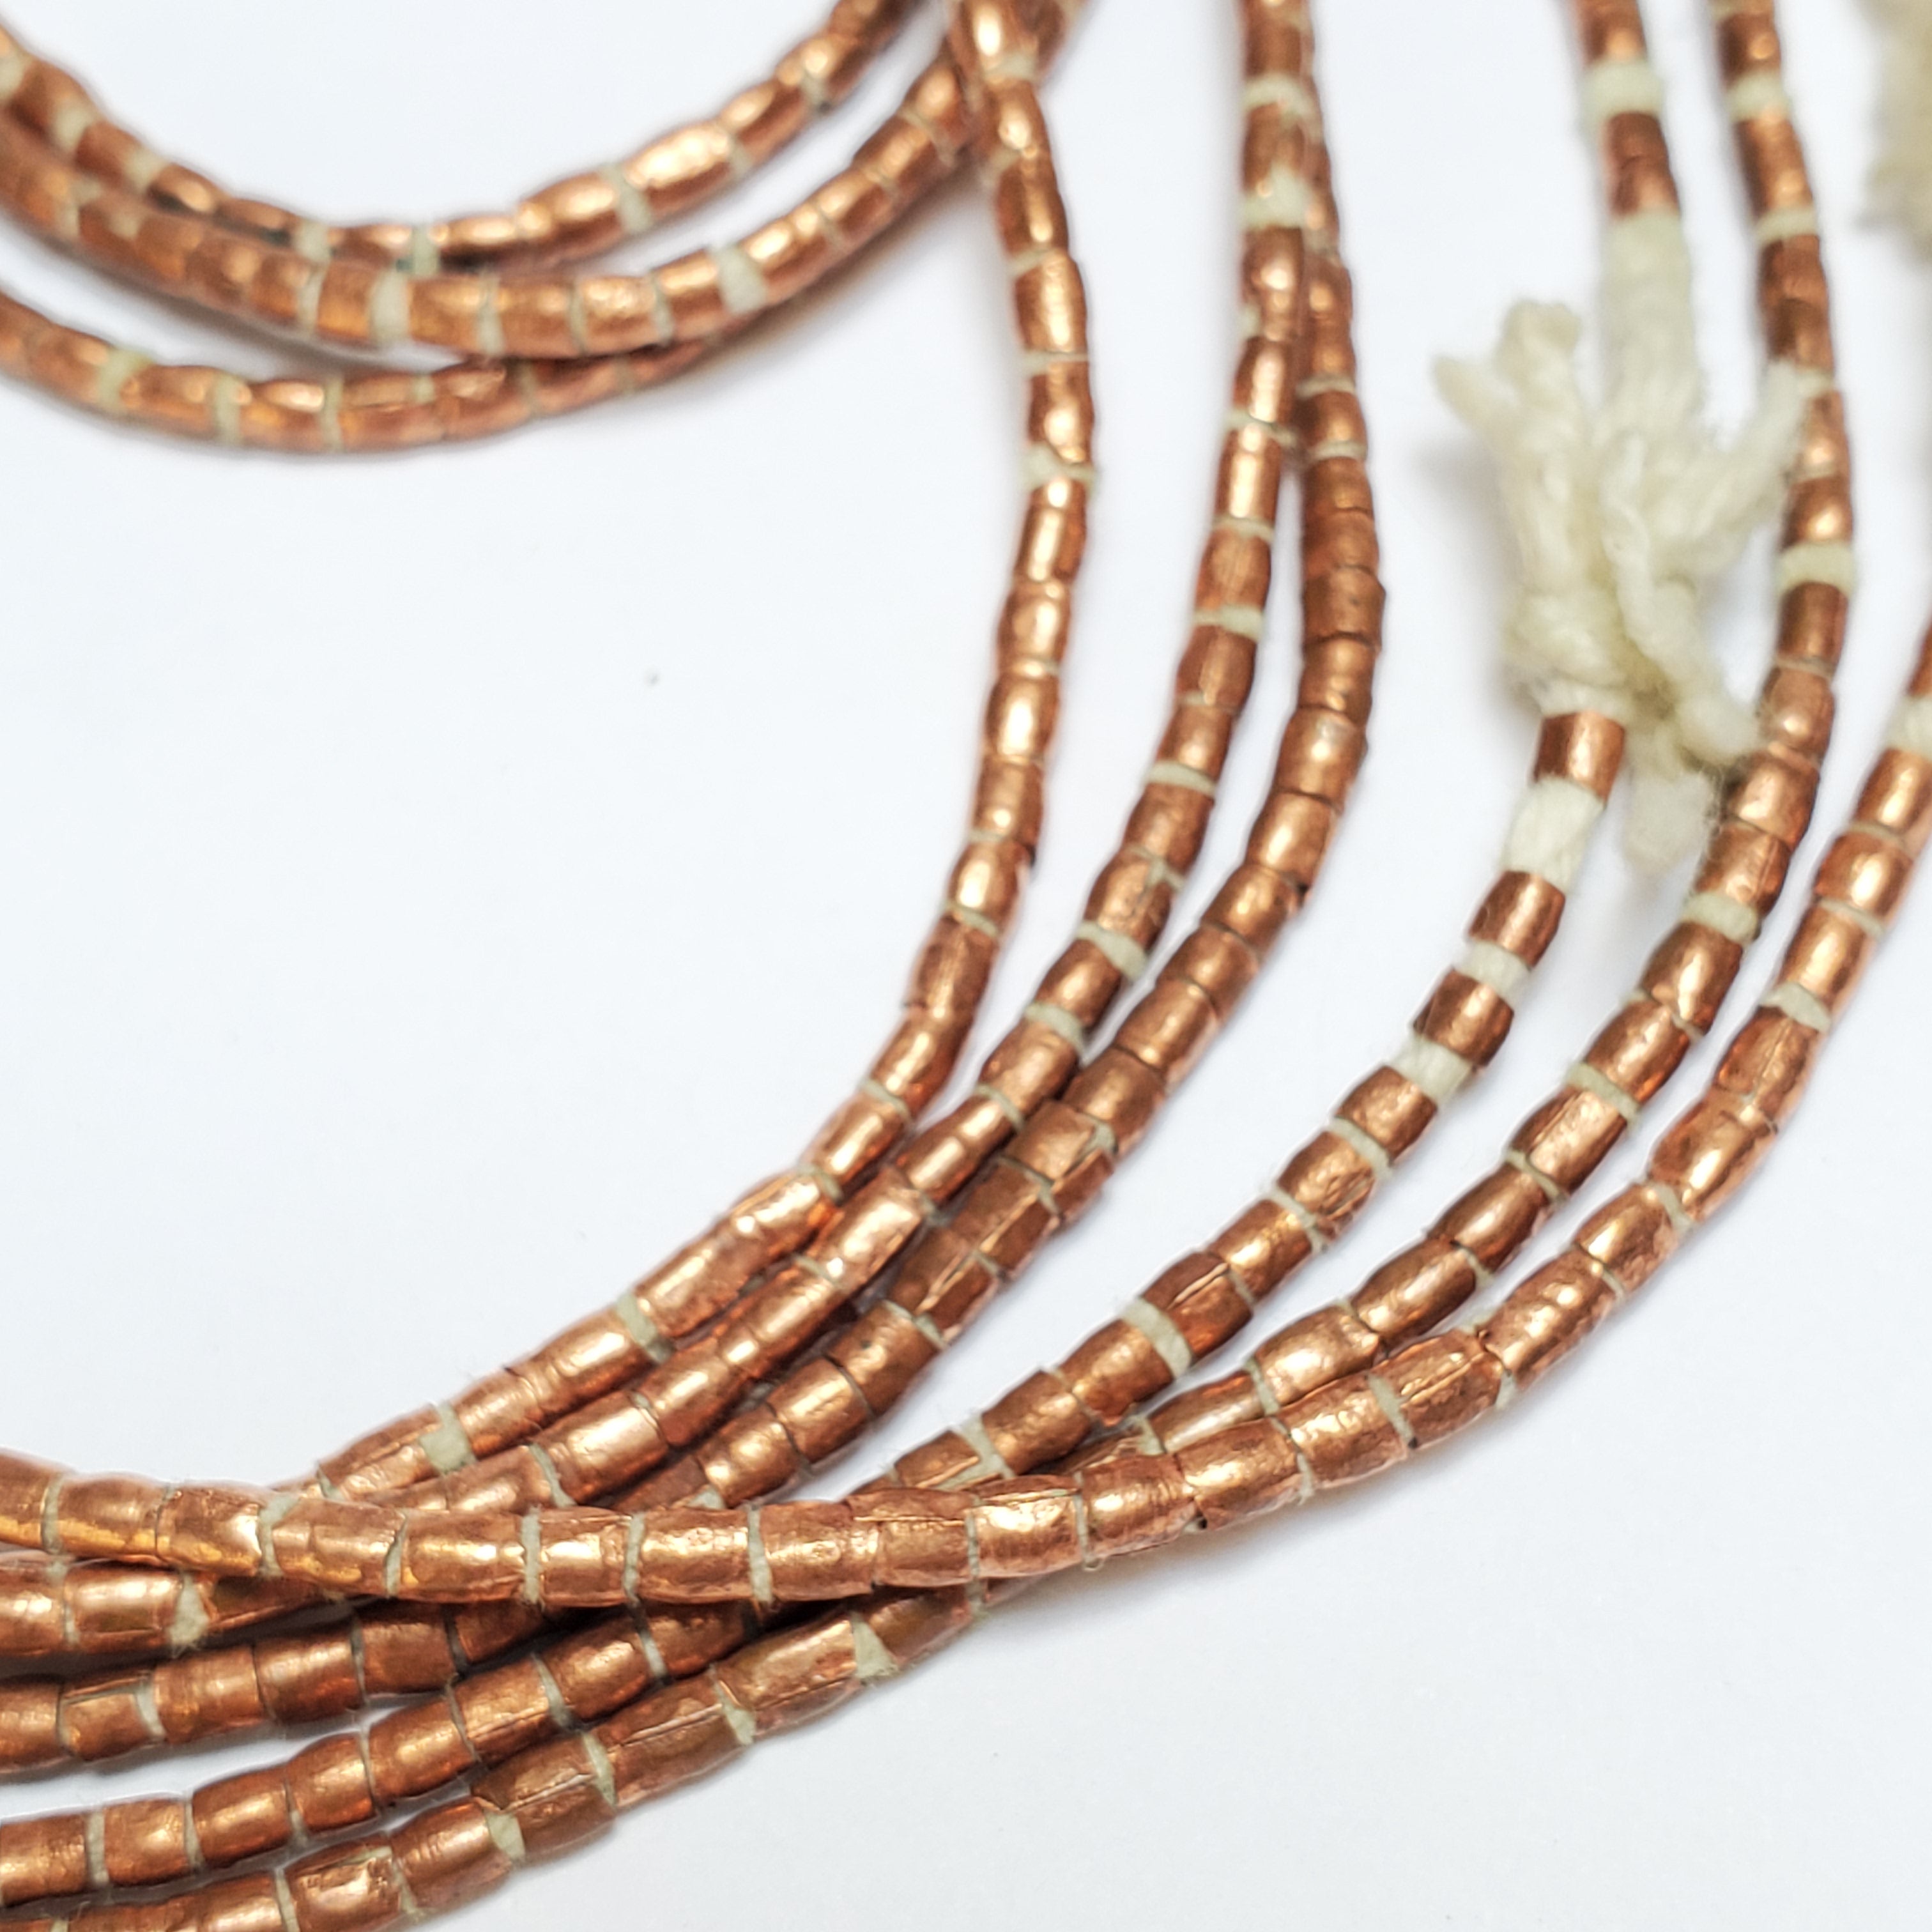 Copper Bead String, Set of 3 Strings, Ethiopian Beads, Handmade African Jewelry